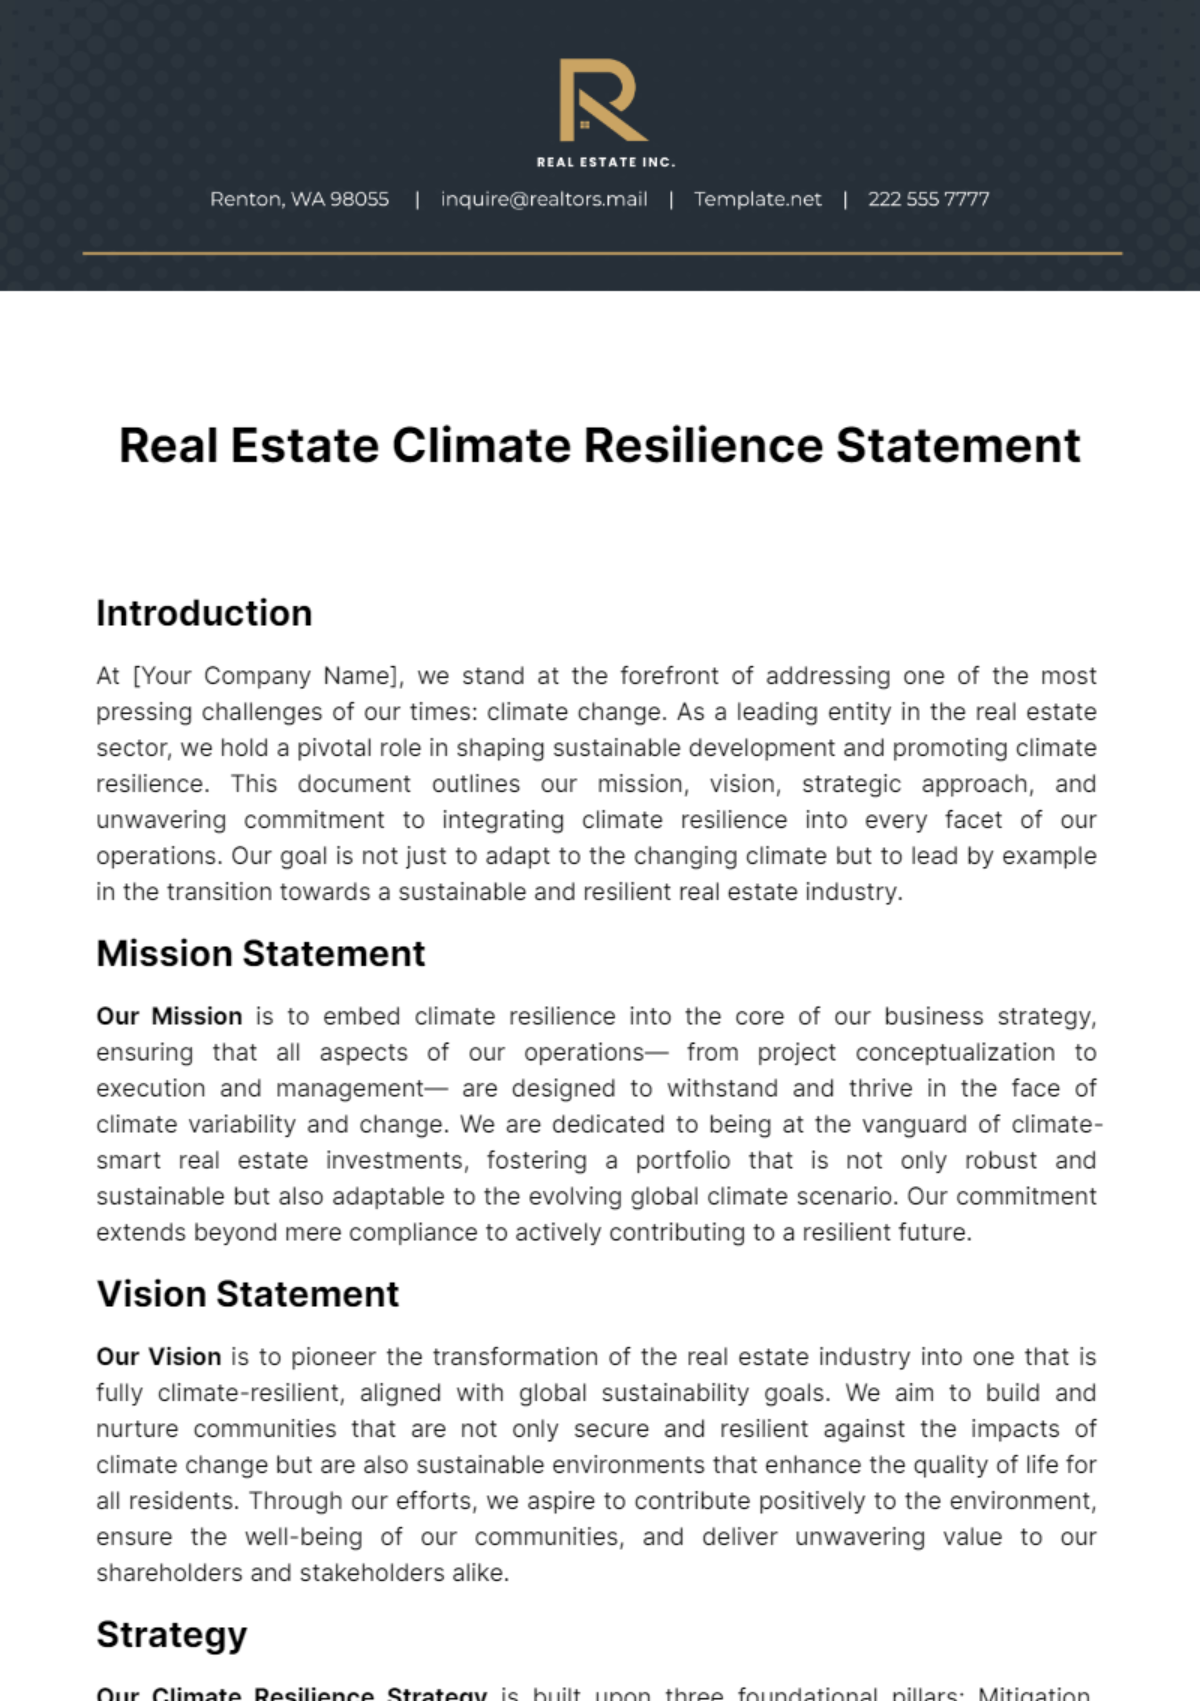 Real Estate Climate Resilience Statement Template